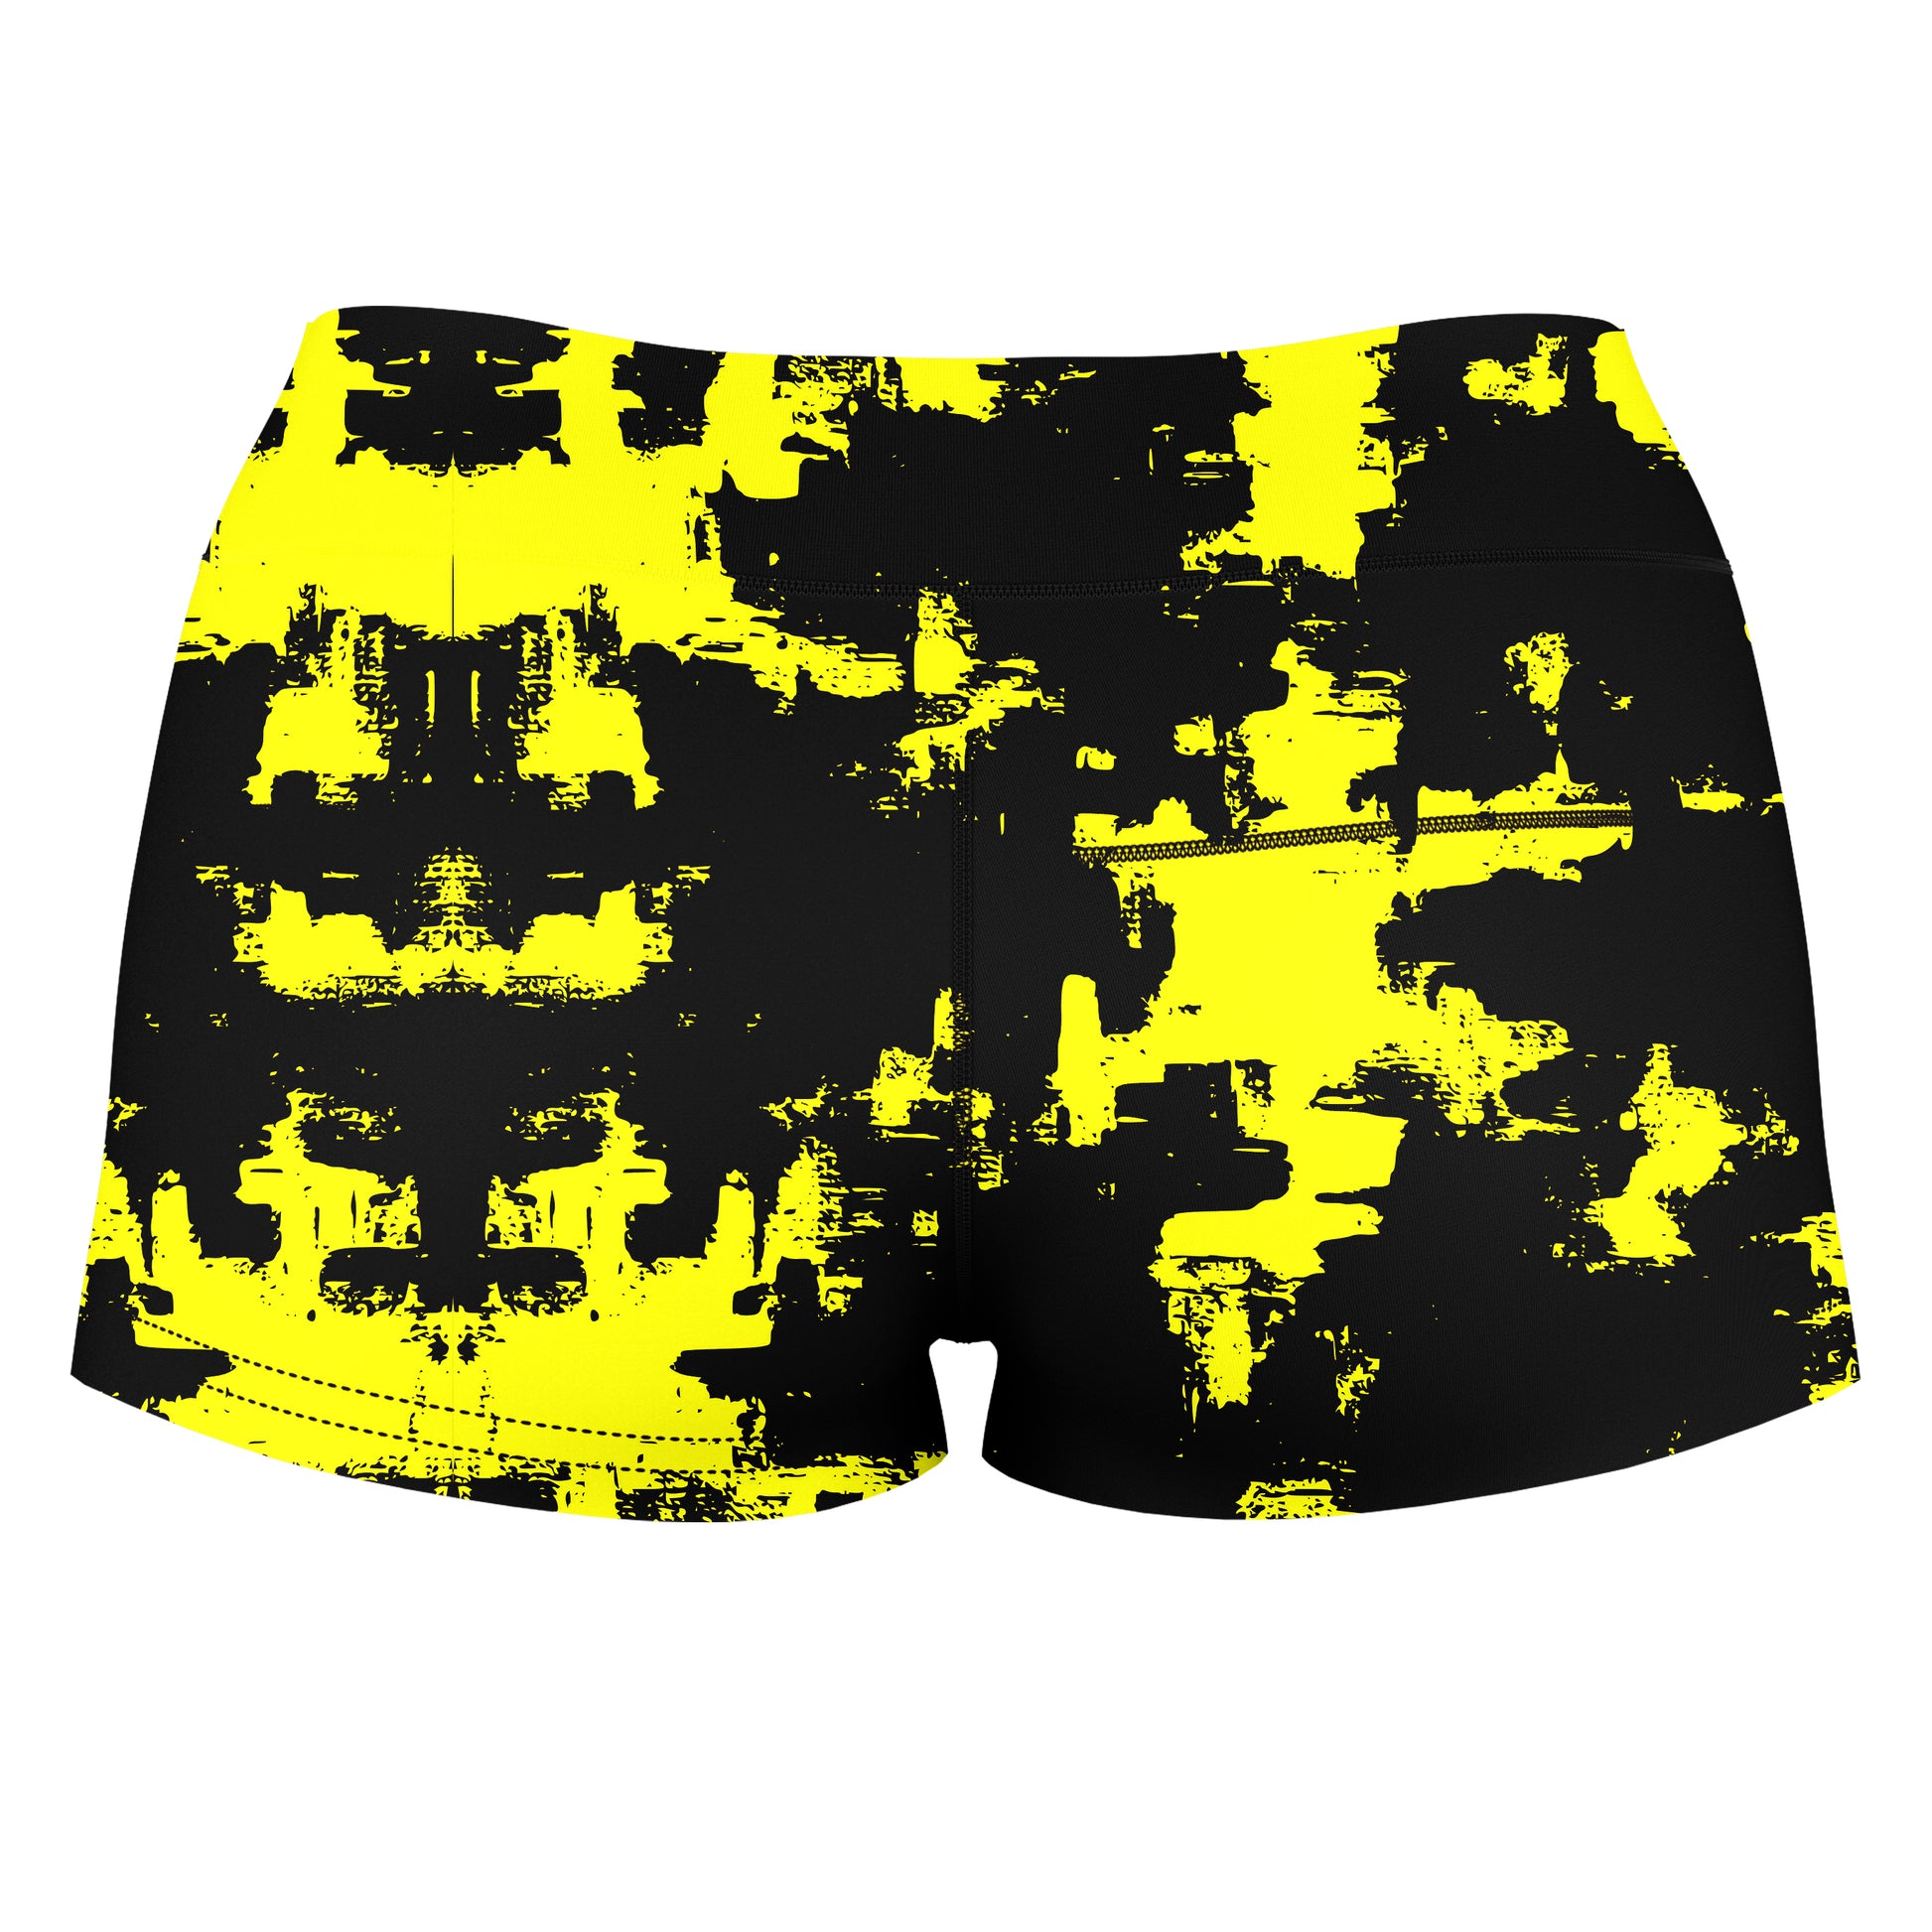 Black and Yellow Abstract High-Waisted Women's Shorts, Big Tex Funkadelic, | iEDM